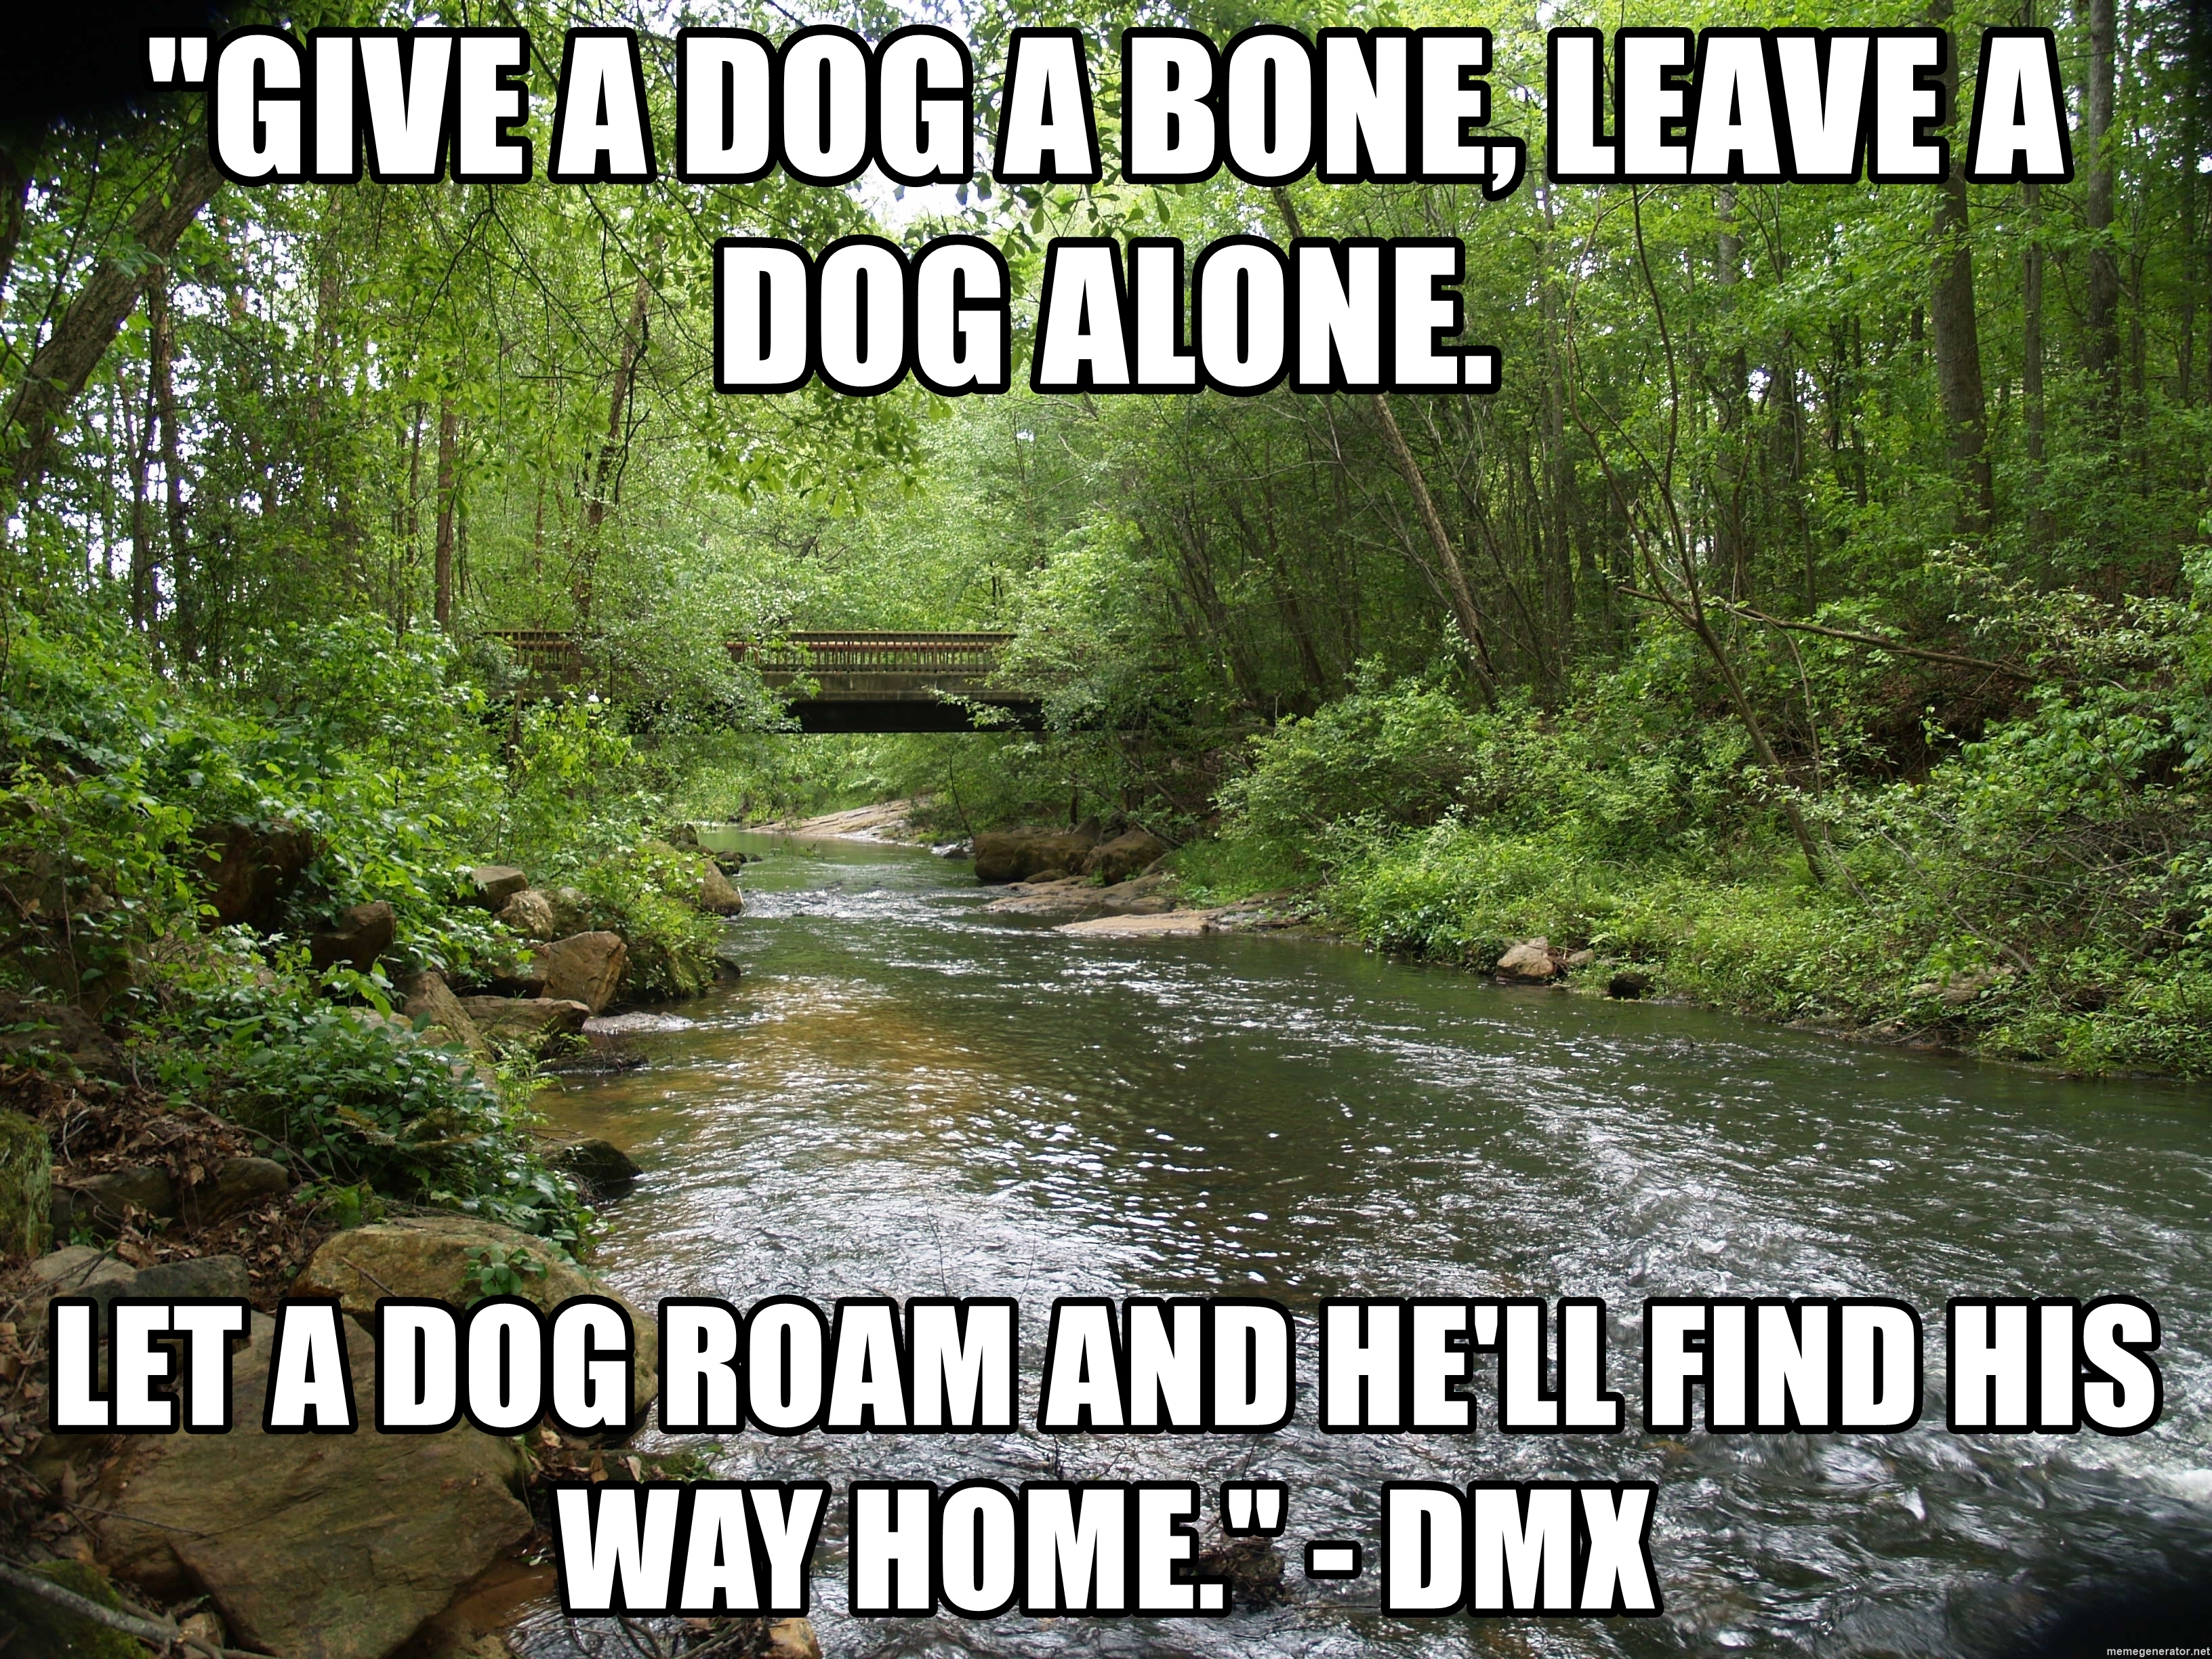 give-a-dog-a-bone-leave-a-dog-alone-let-a-dog-roam-and-hell-find-his-way-home-dmx.jpg